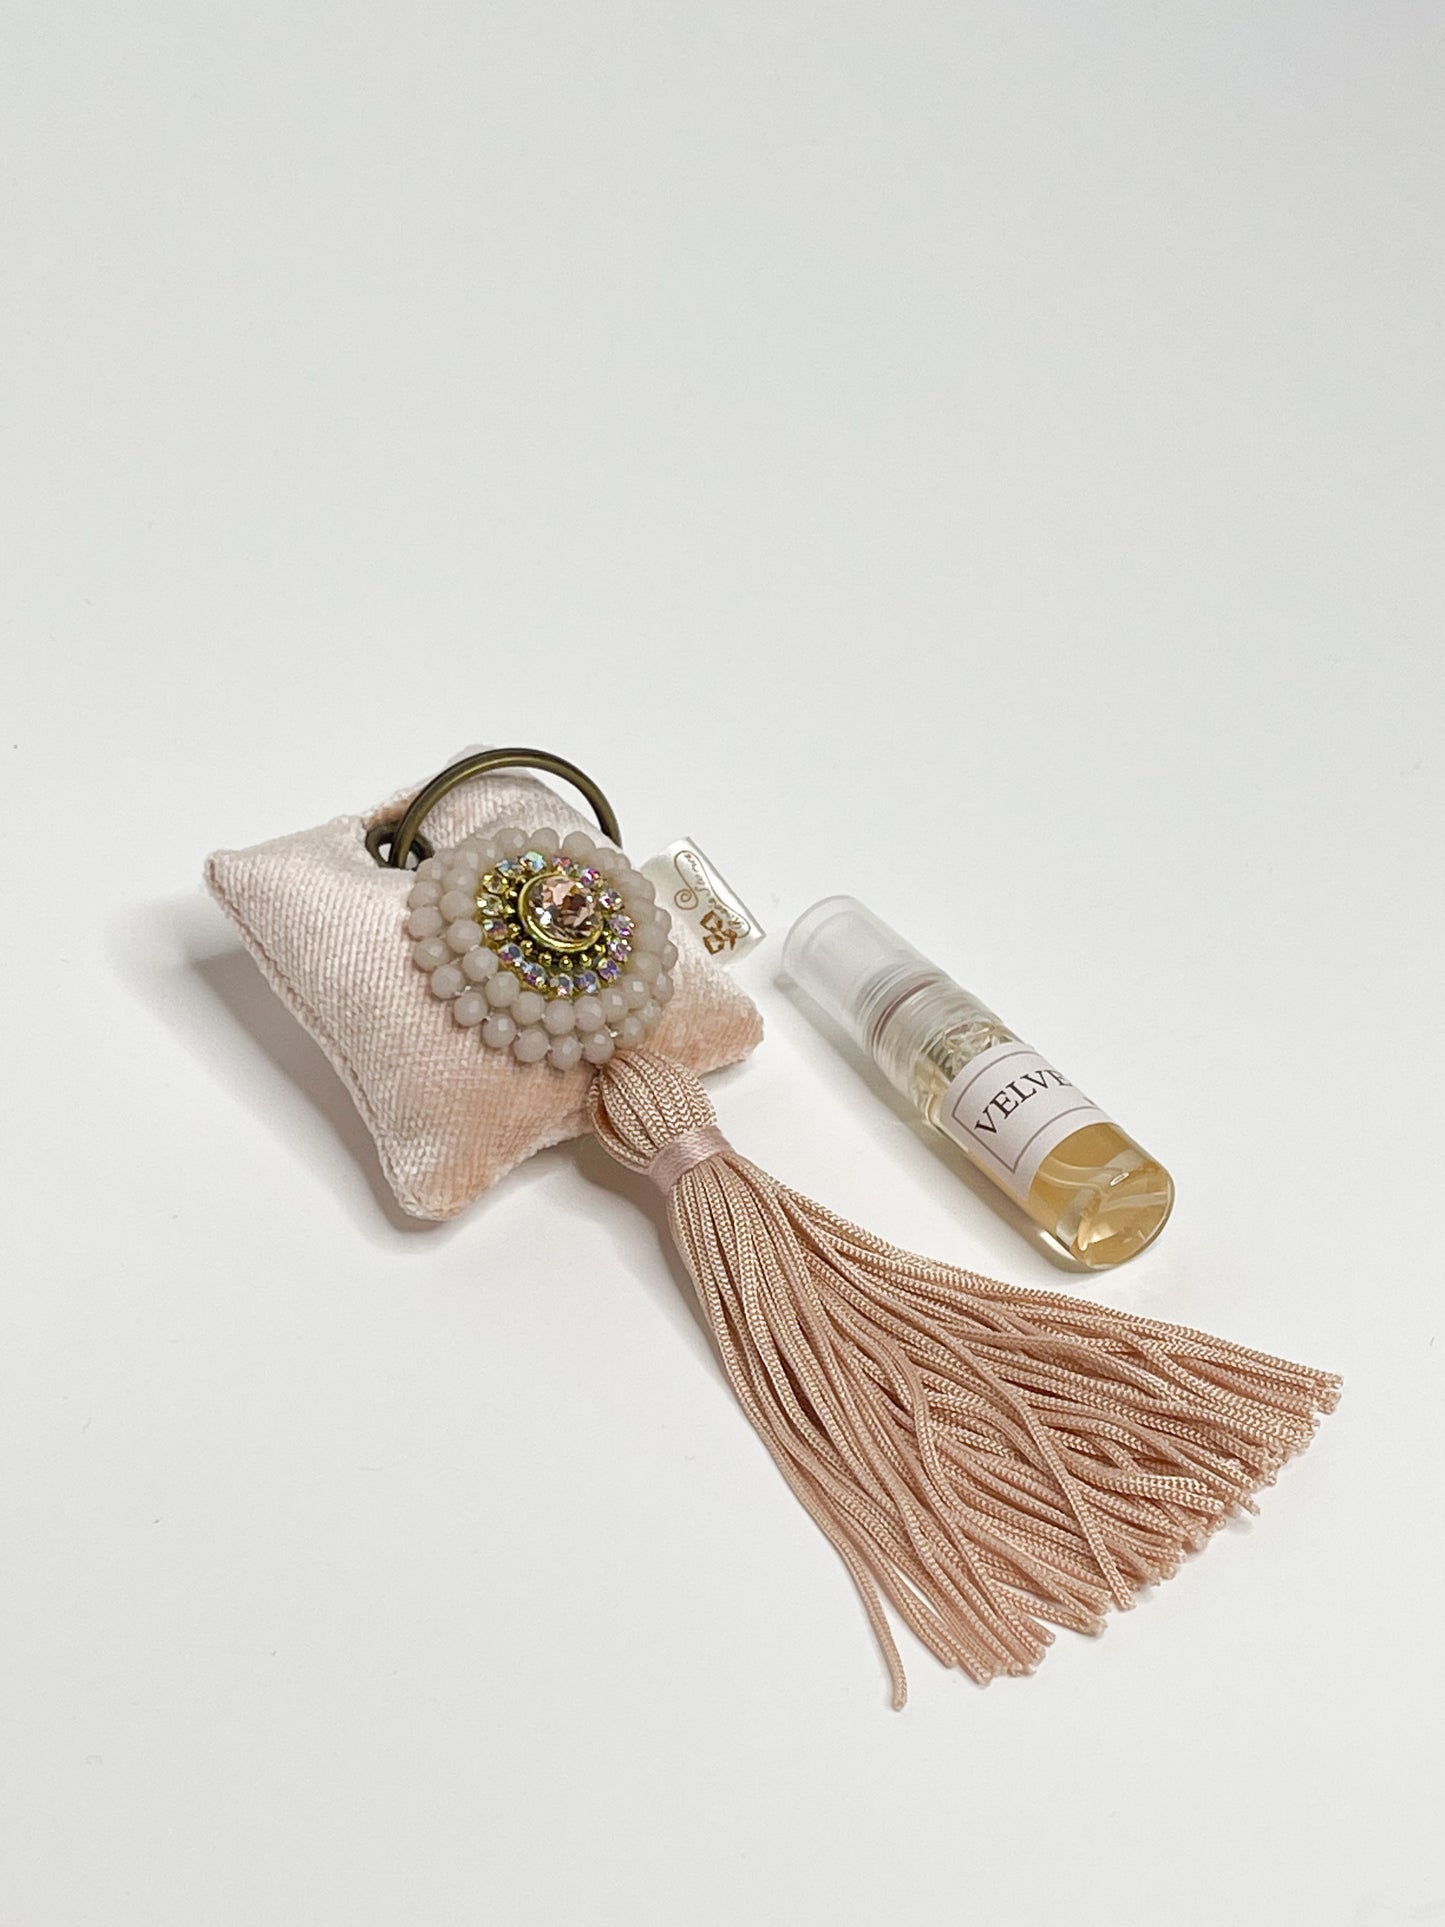 Scented key chain with sparkling crystals